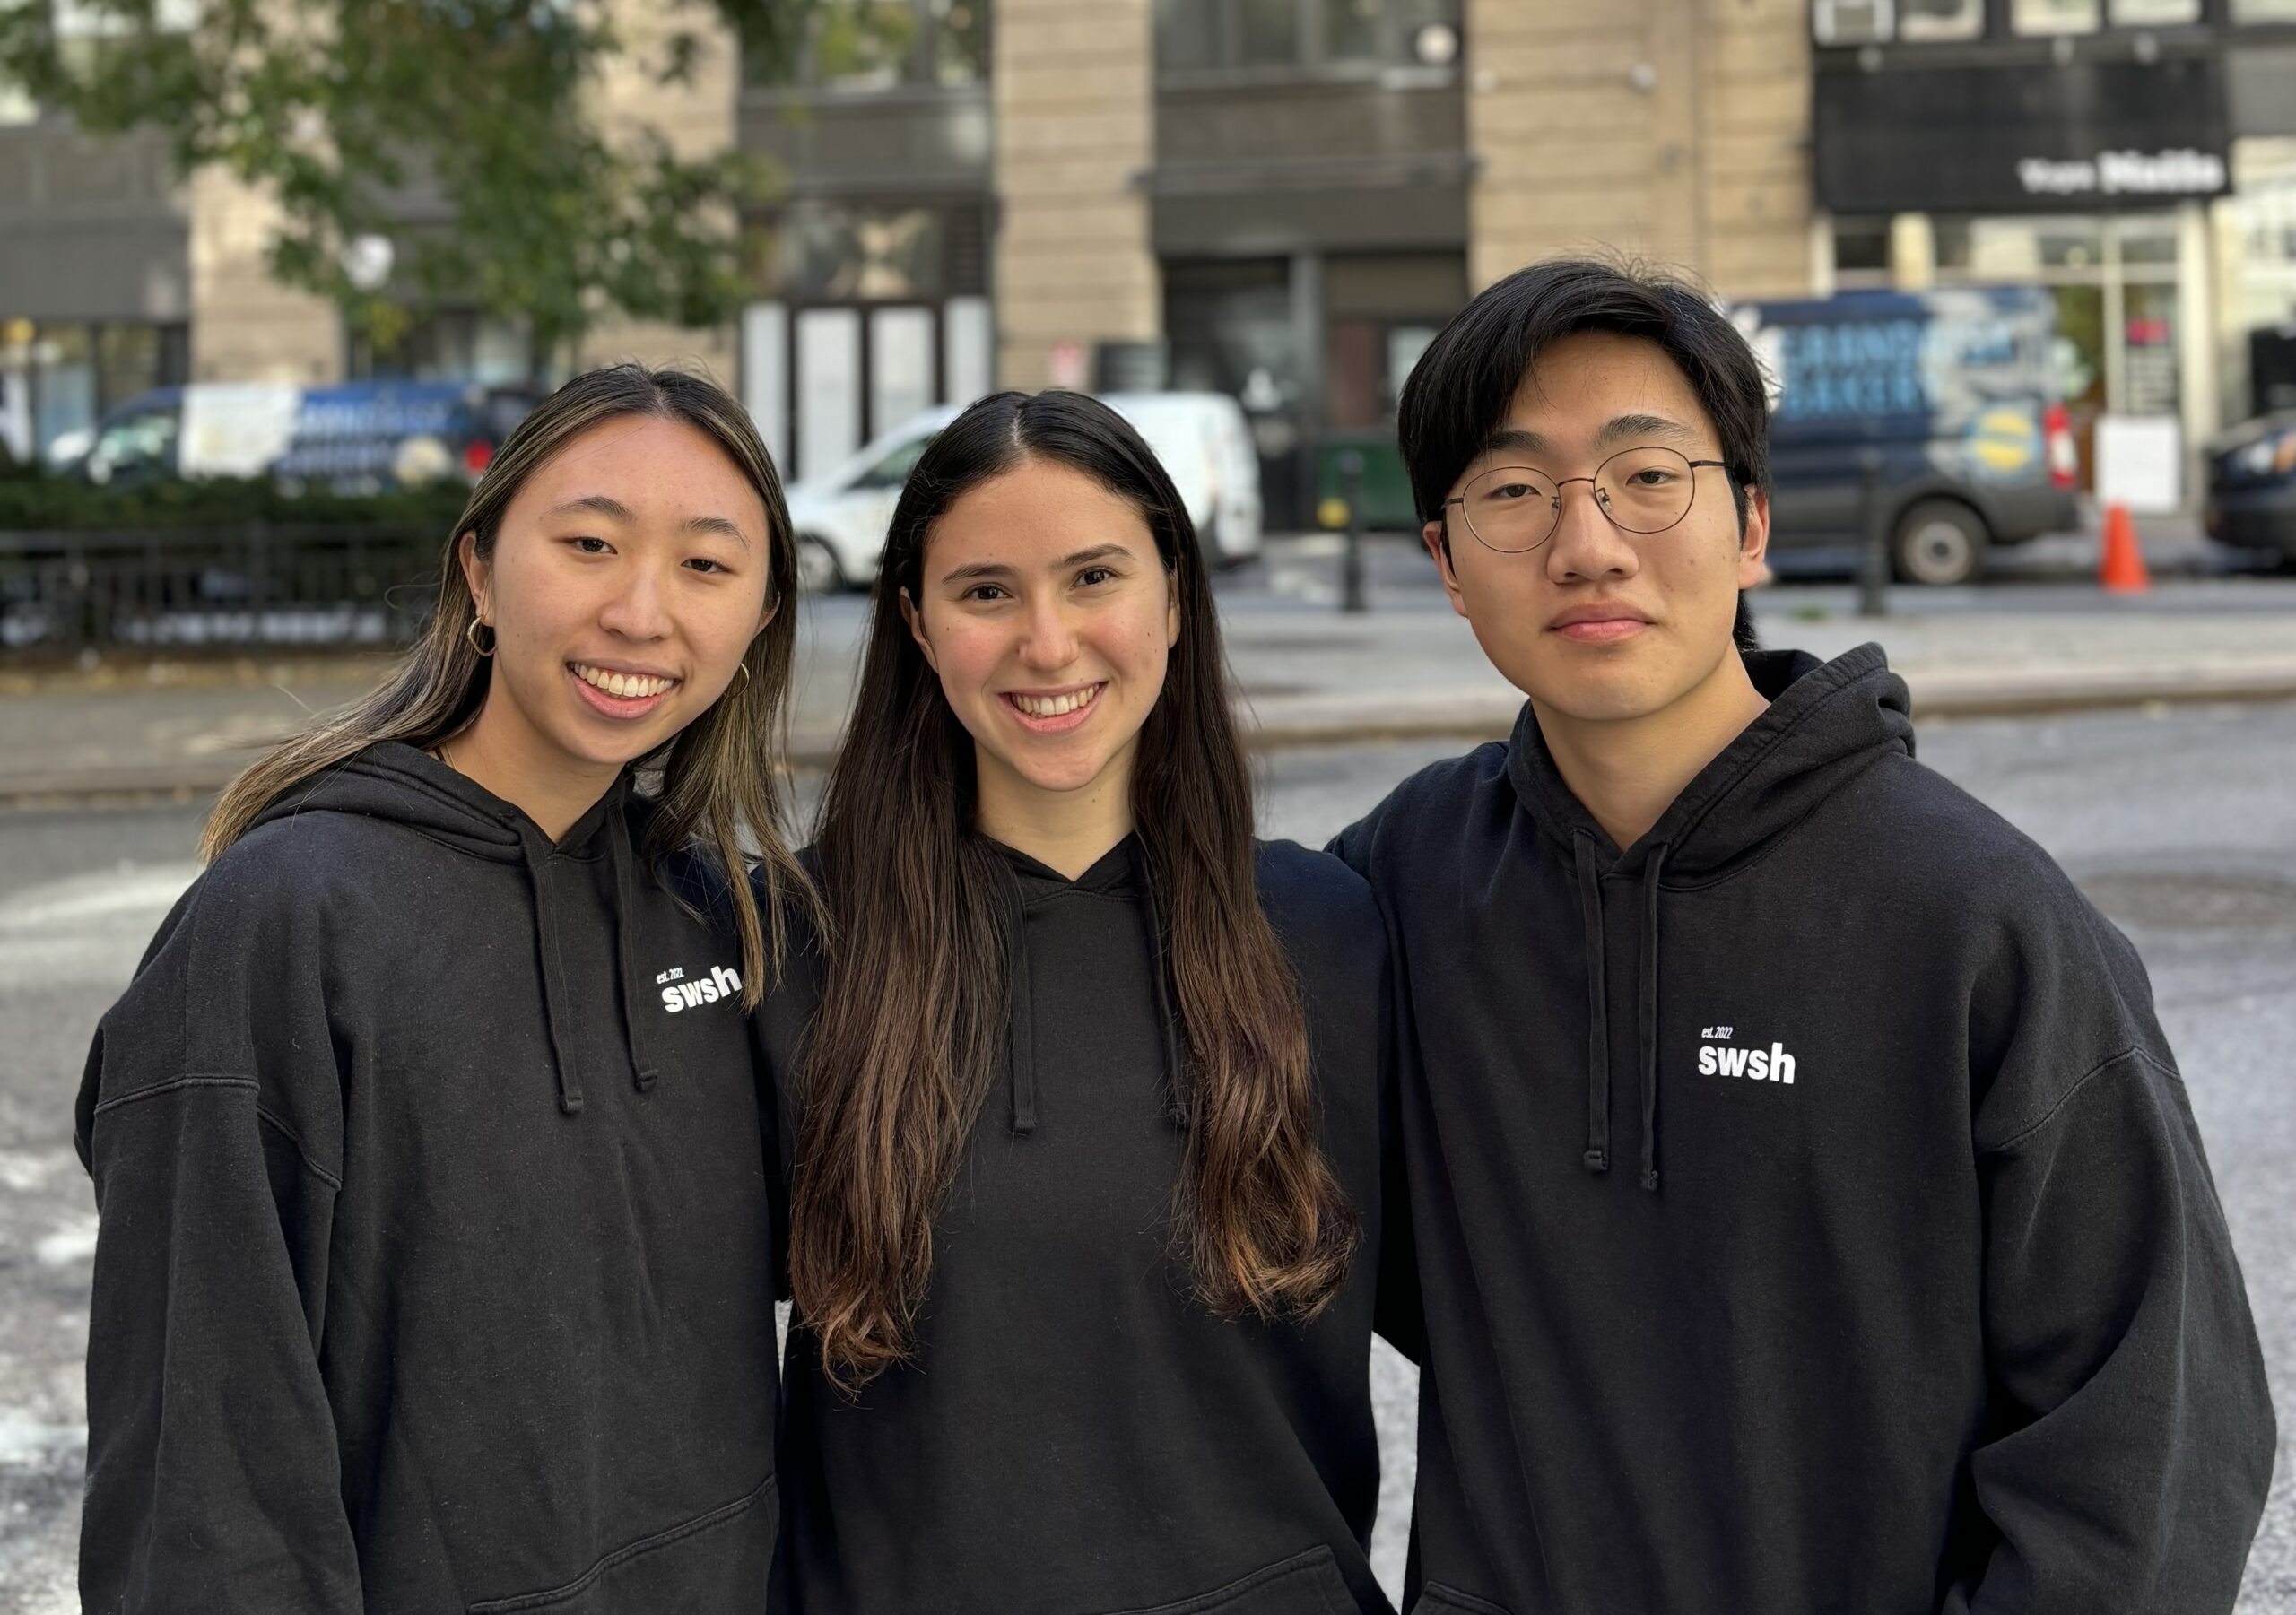 Tandon student Alexandra Debow (center) along with swsh cofounders Princeton student Weilyn Chong (left) and Yale student Nathan Ahn (right).